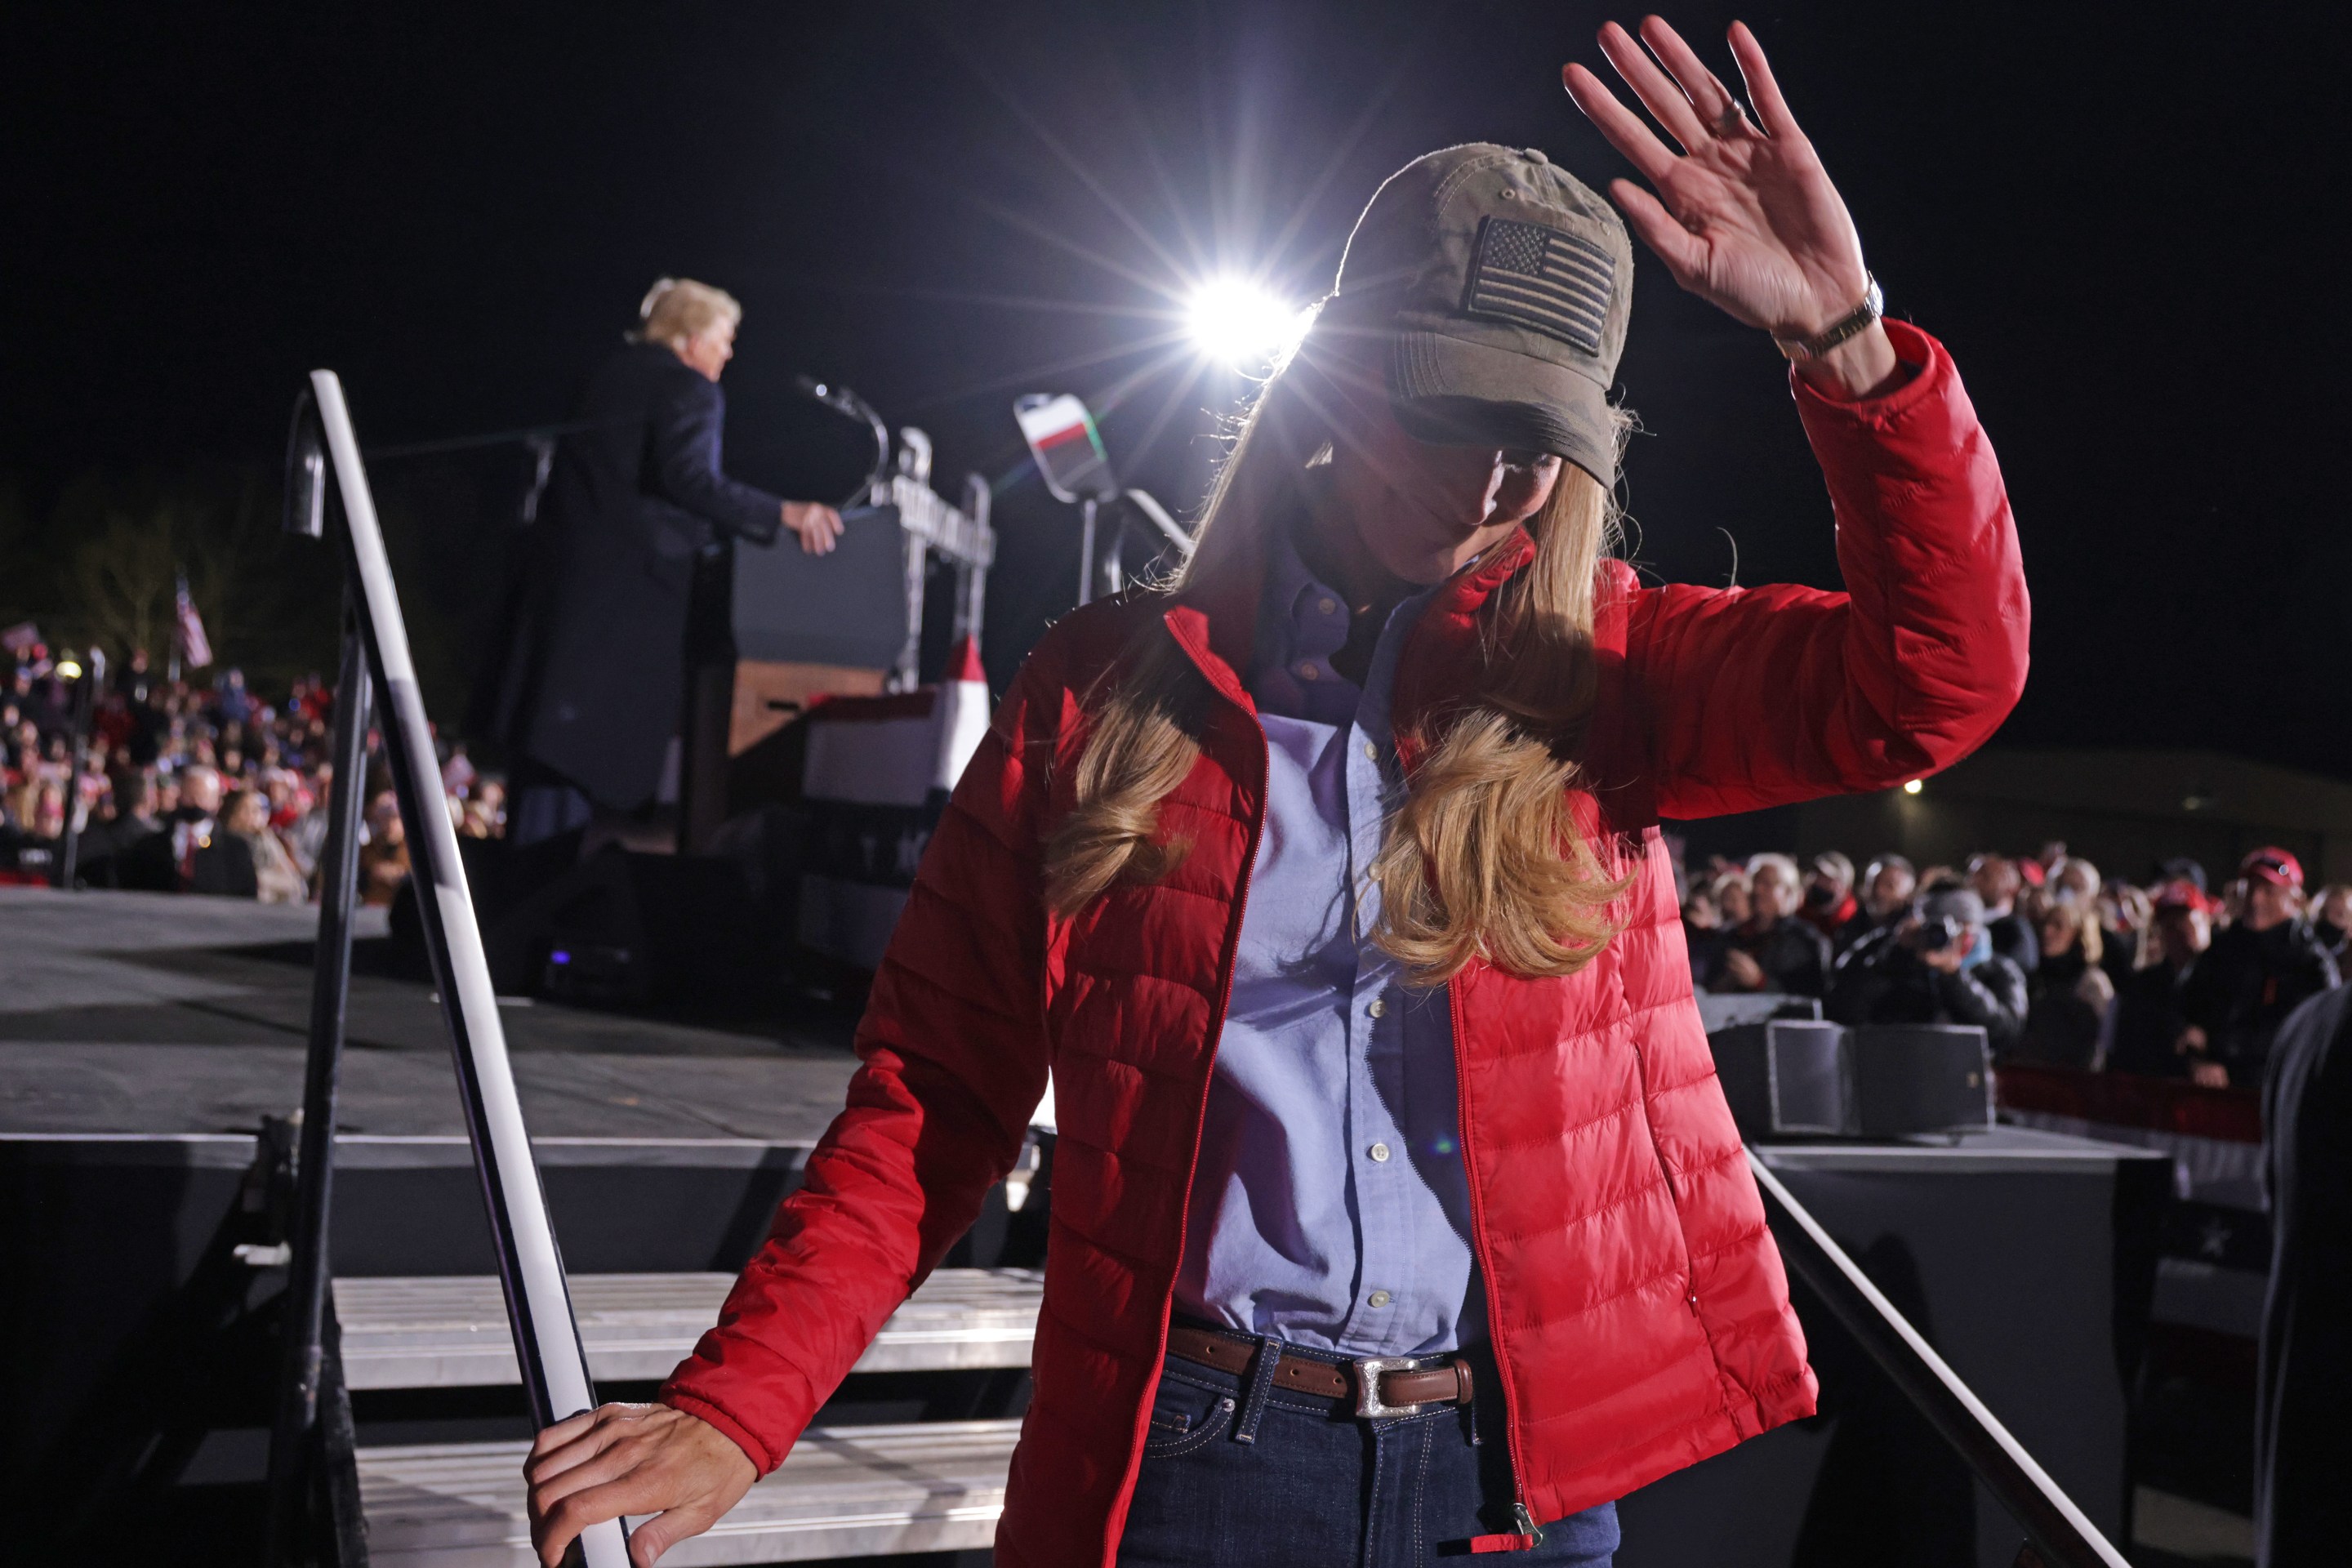 U.S. Sen. Kelly Loeffler (R-GA) steps off the stage after she spoke during a Republican National Committee Victory Rally at Dalton Regional Airport January 4, 2021 in Dalton, Georgia. President Trump campaigned for the two incumbents, Sen. David Perdue (R-GA) and Sen. Kelly Loeffler (R-GA), for runoff elections in Georgia.